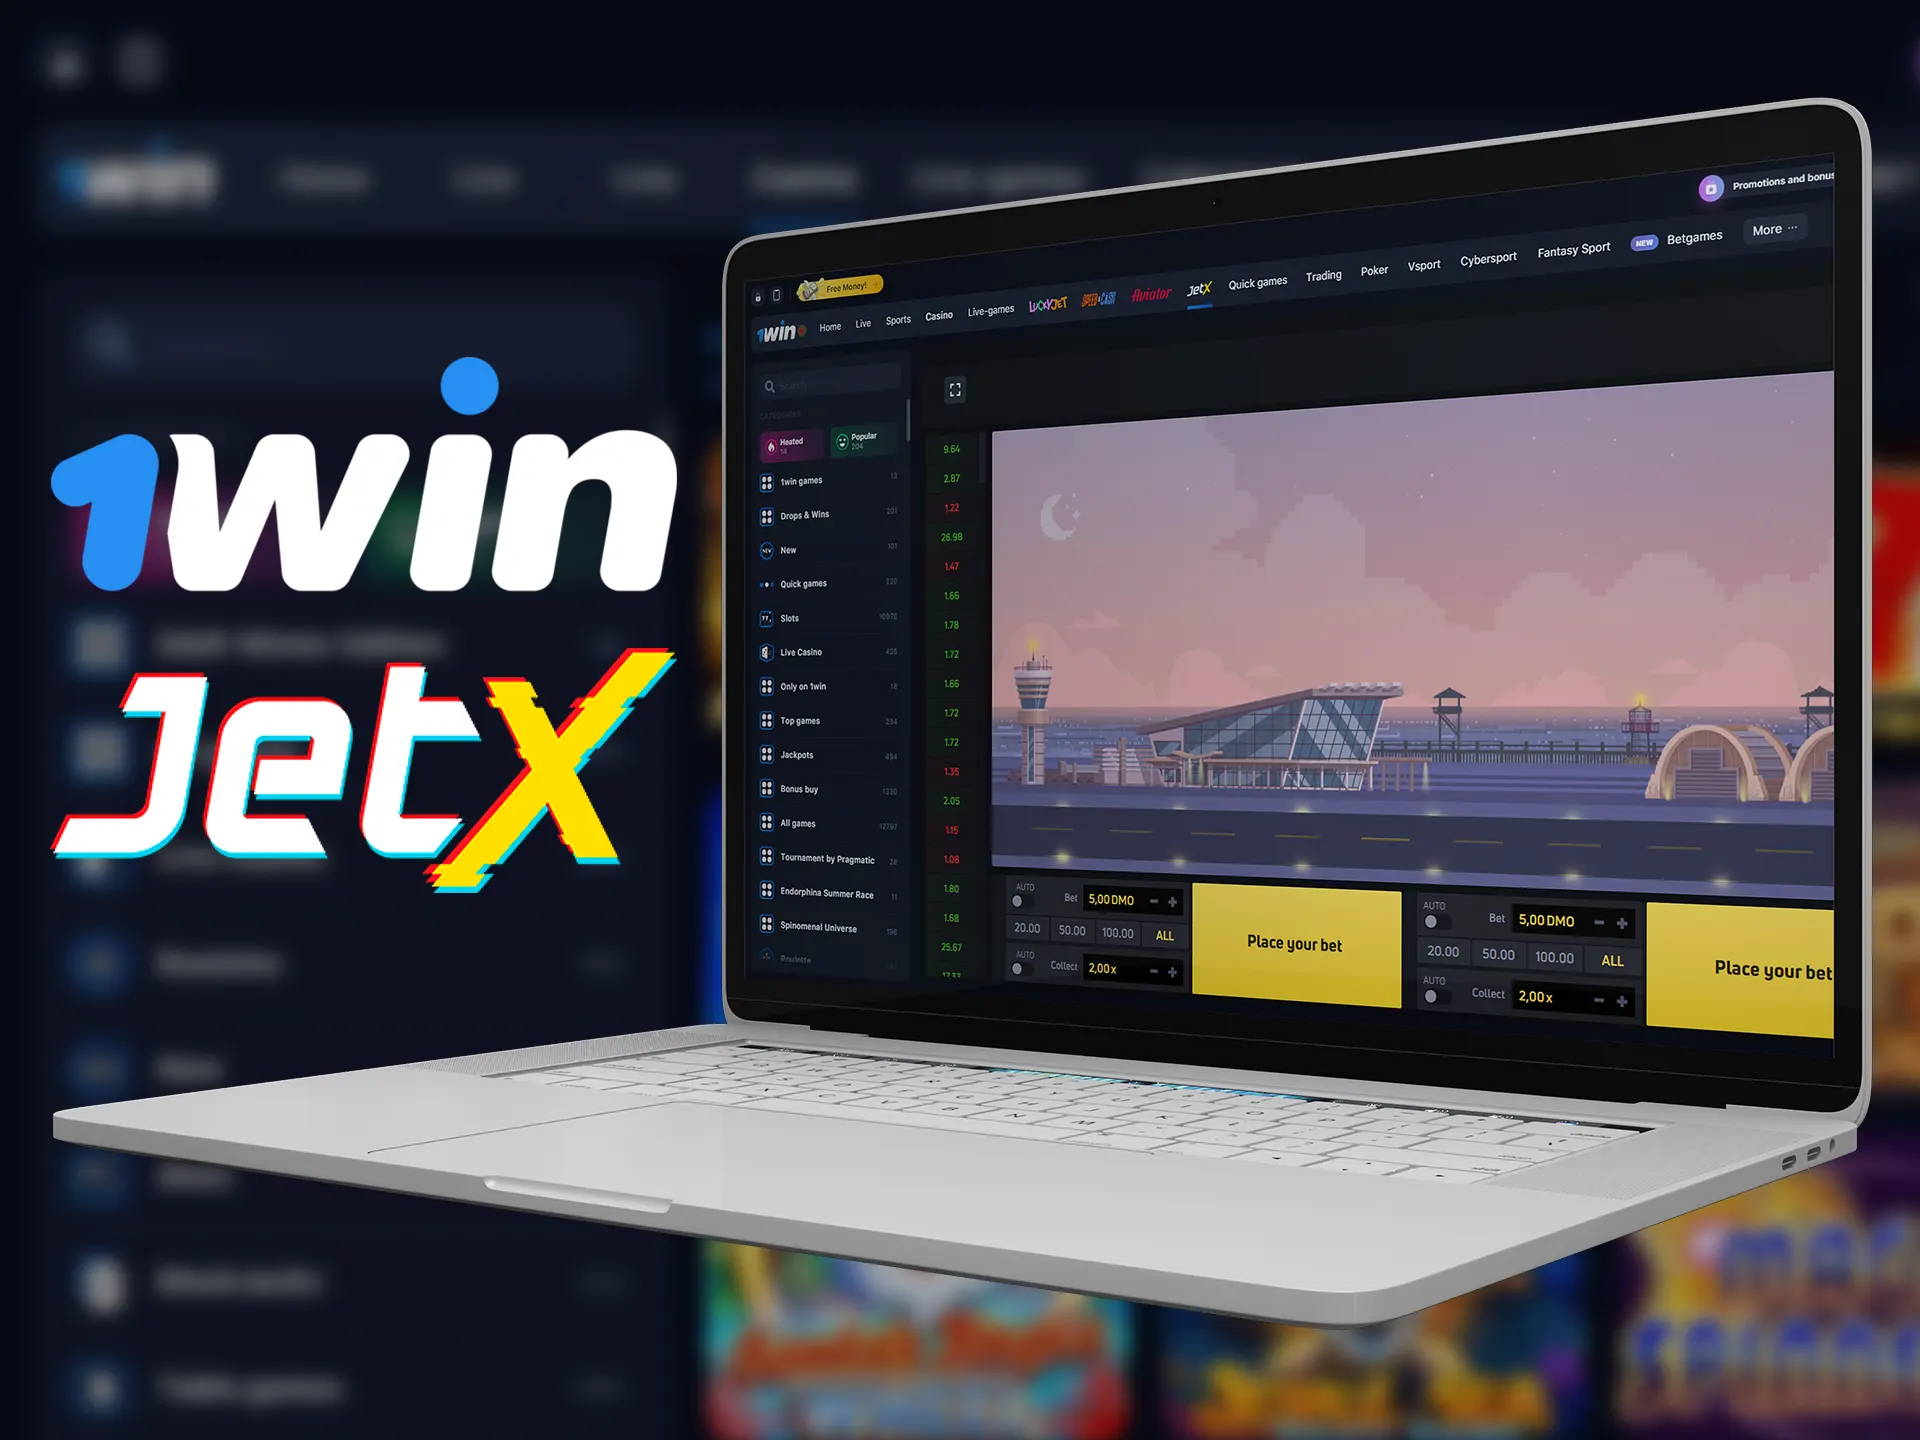 Try 1win for playing the JetX game.